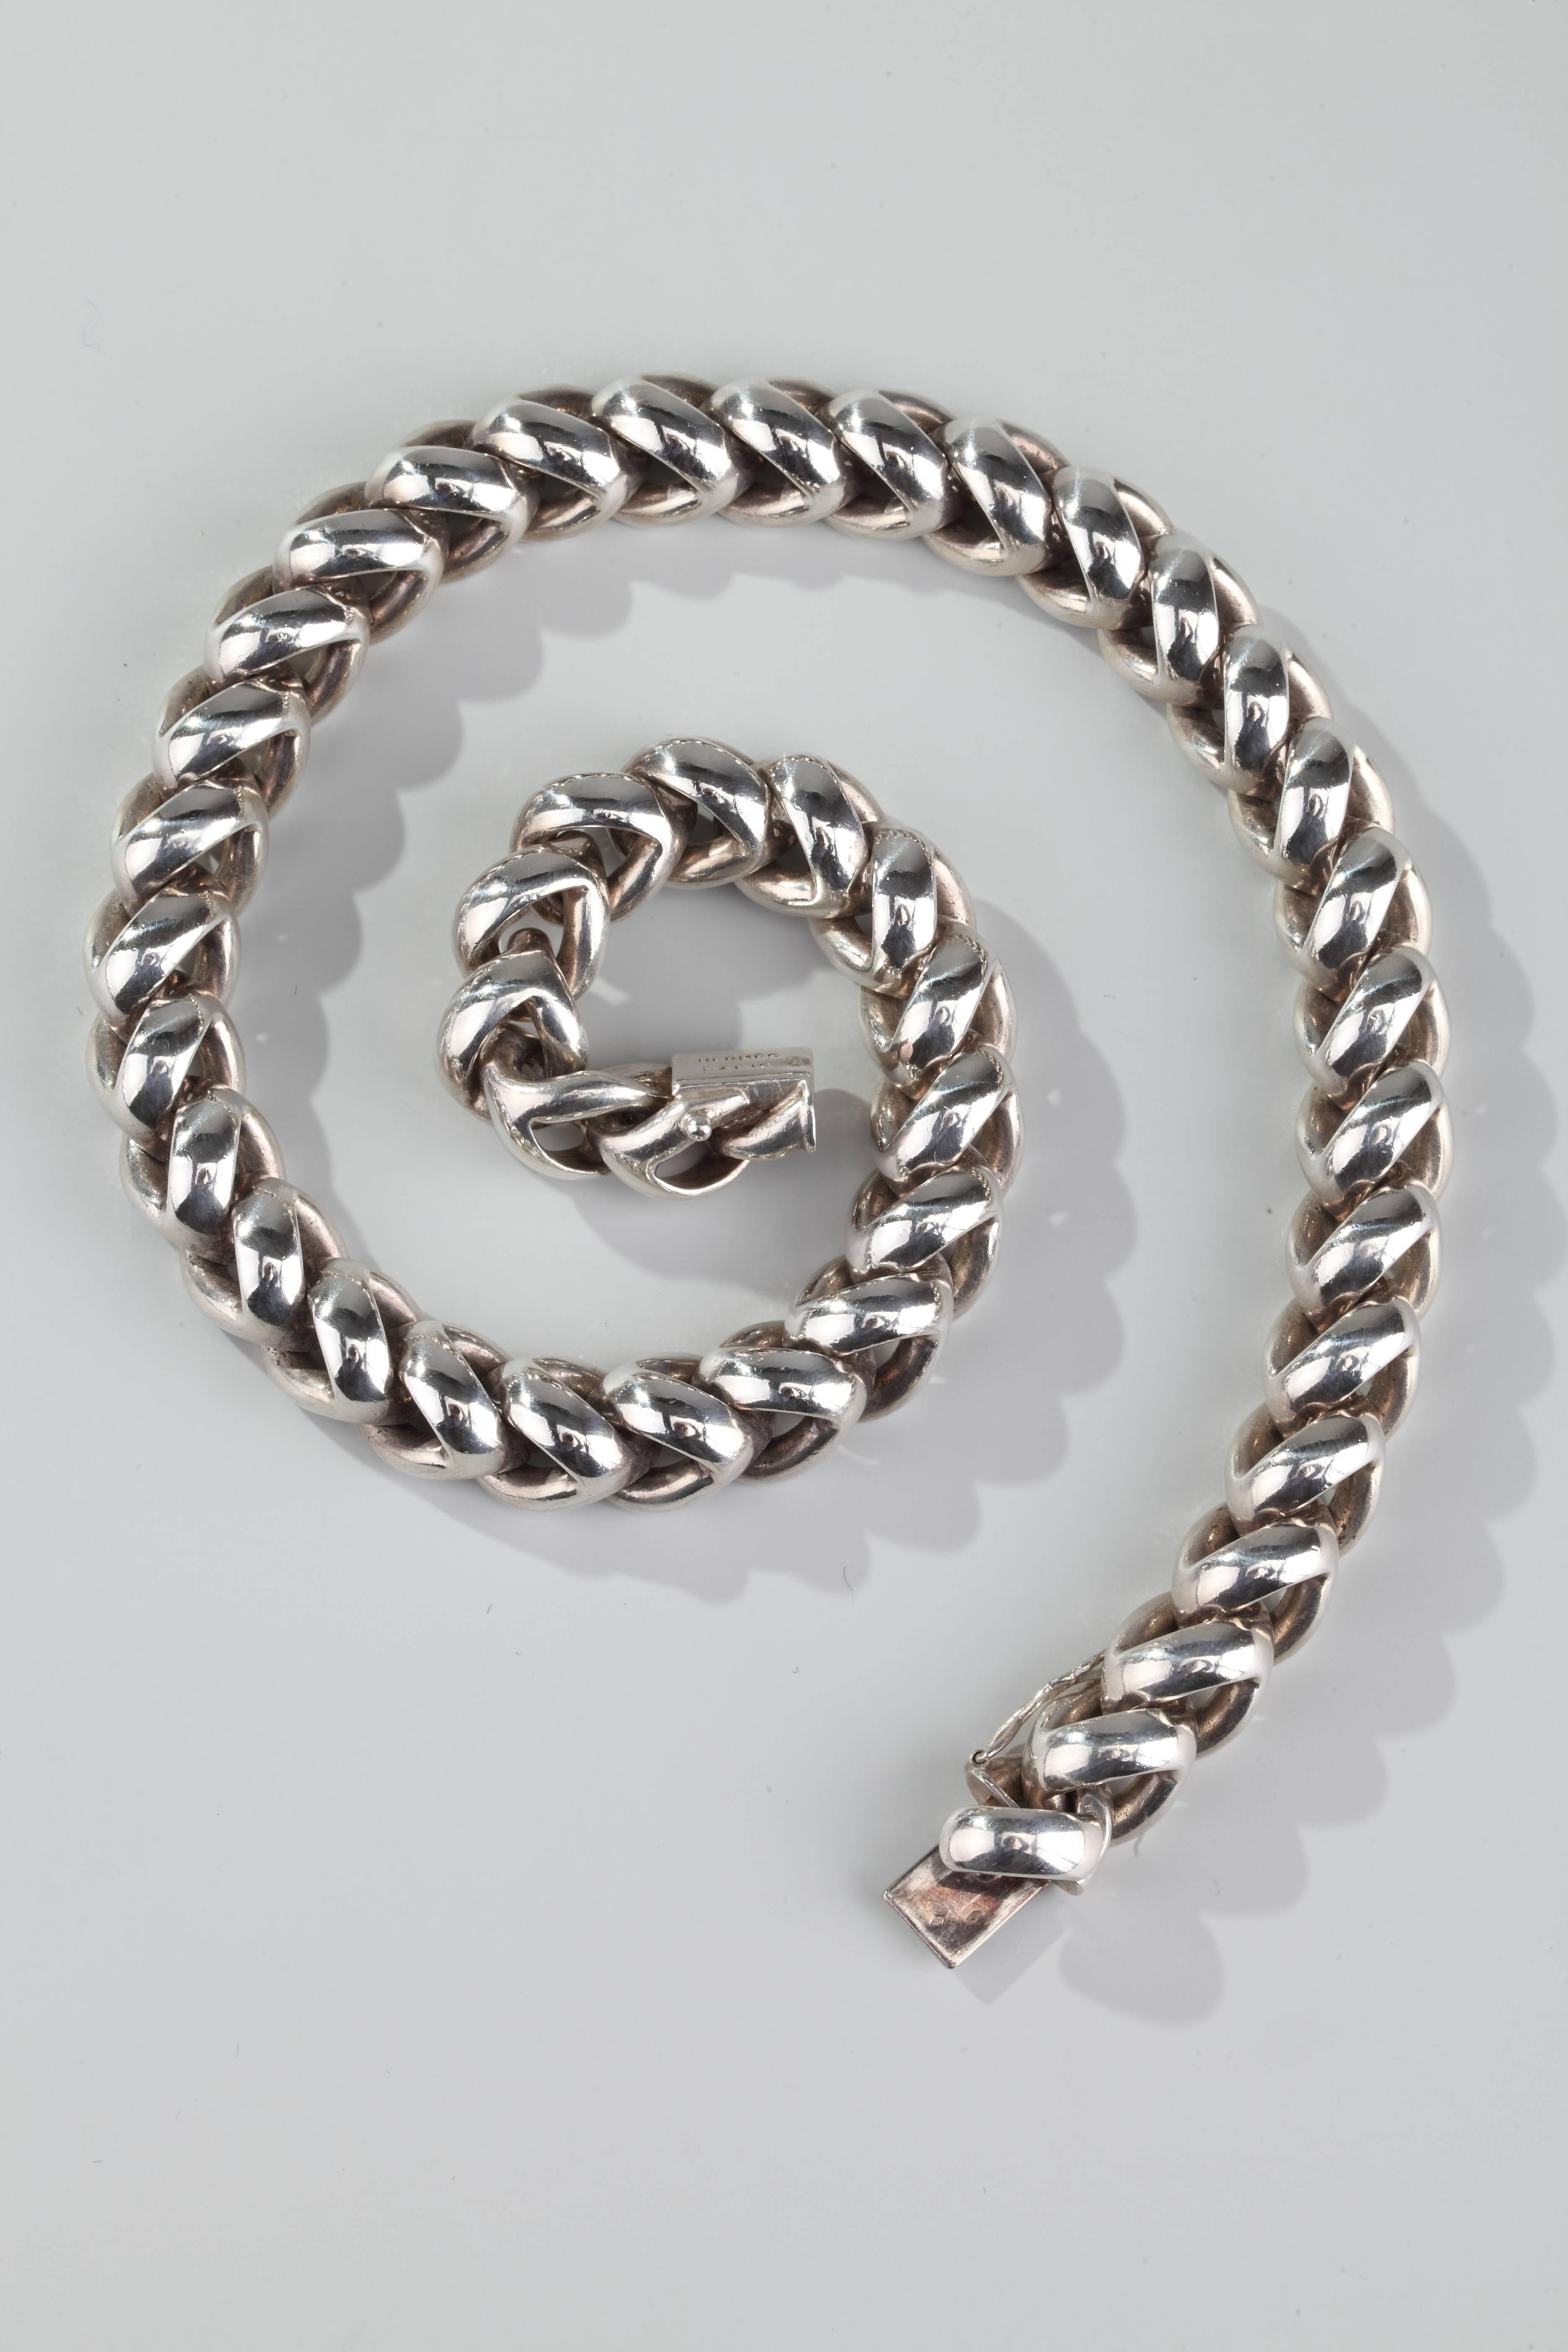 Heavy sterling silver torsade chain necklace, signed Hermès Paris.
In its original box.
